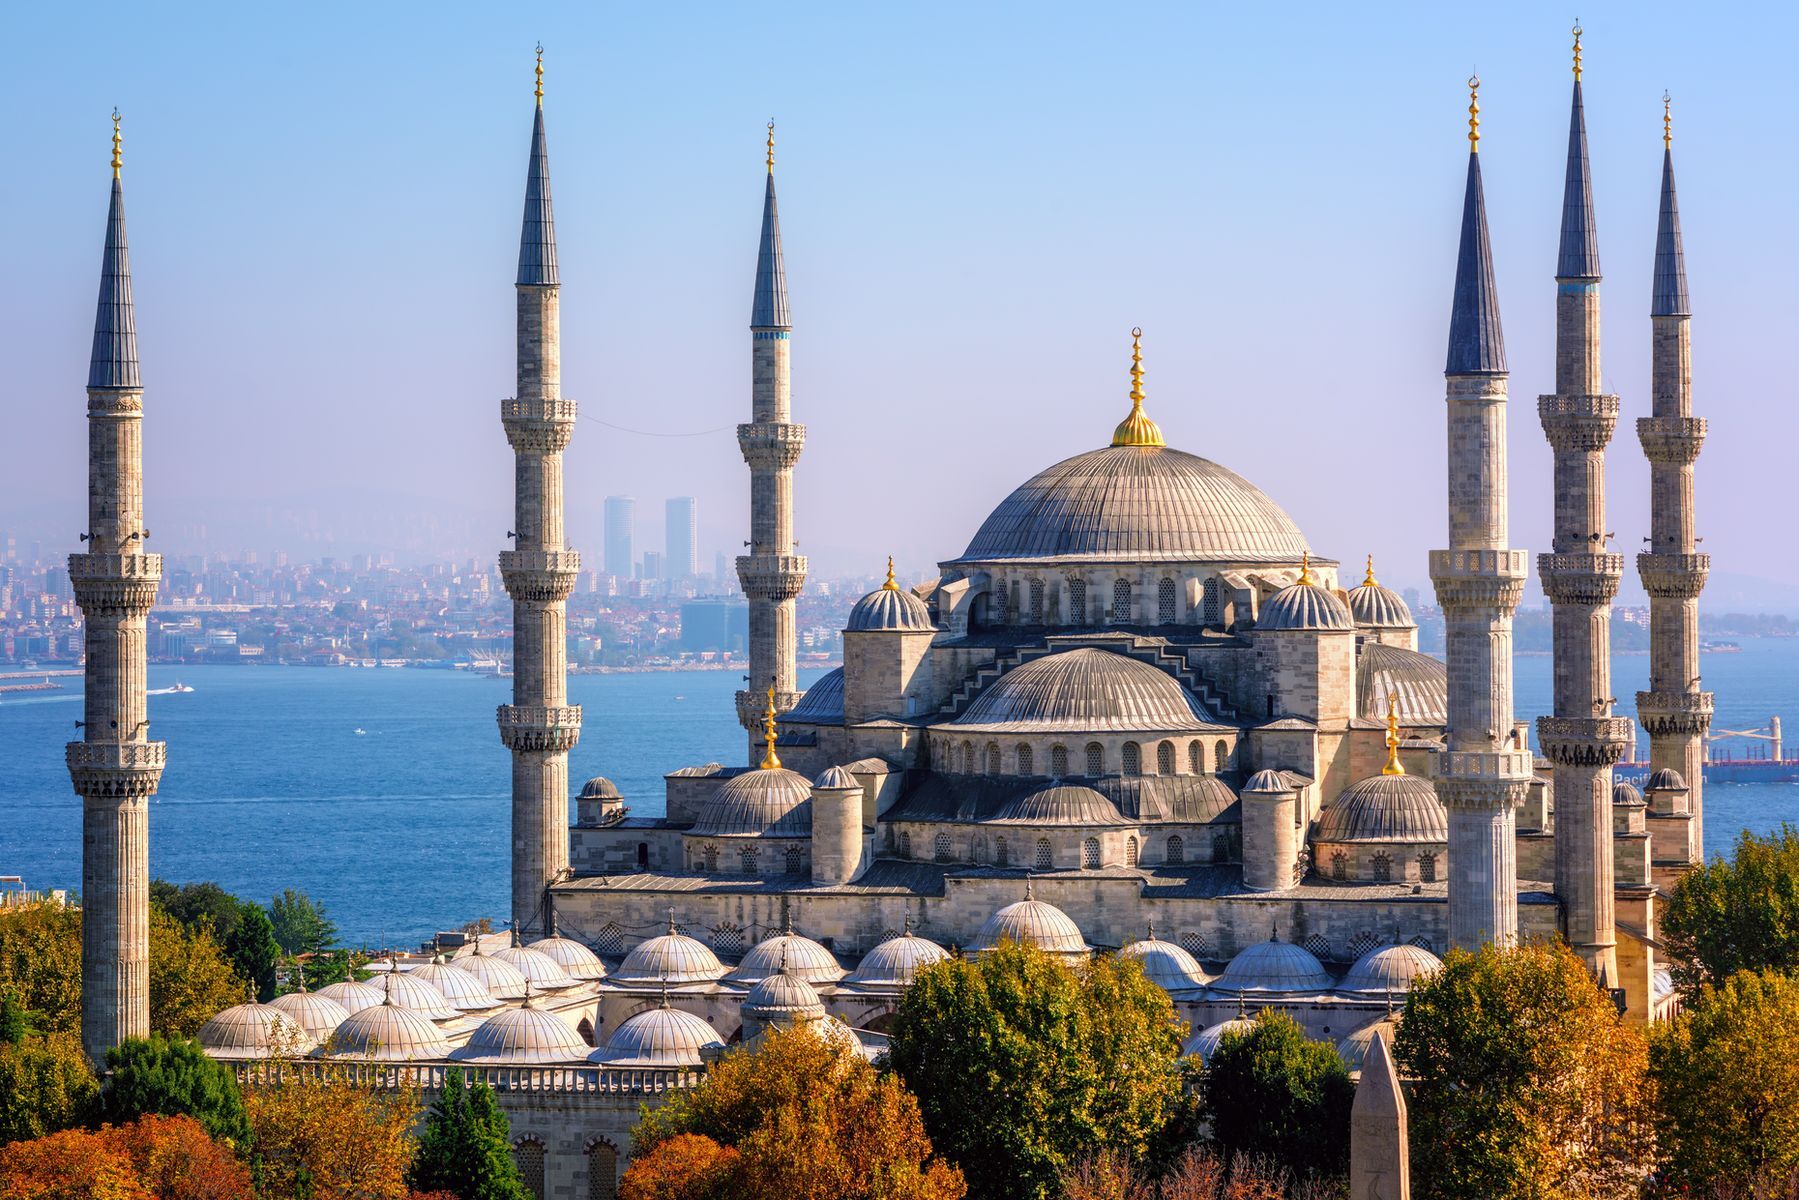 <p>Straddling the border between Europe and Asia, <a href="https://www.hotels.com/go/turkey/free-things-to-do-istanbul" rel="noreferrer noopener">Ista</a><a href="https://www.hotels.com/go/turkey/free-things-to-do-istanbul" rel="noreferrer noopener">n</a><a href="https://www.hotels.com/go/turkey/free-things-to-do-istanbul" rel="noreferrer noopener">bul</a> has a rich history as the former capital of both the Byzantine and Ottoman Empires. Views of the city often include the emblematic <a href="https://smarthistory.org/the-blue-mosque-sultan-ahmet-camii/" rel="noreferrer noopener">Blue Mosque</a>, or Sultan Ahmed Mosque, a must-see destination you can visit for free outside of prayer time. While in the neighbourhood, try some inexpensive izgara köftes (grilled meatballs) at the nearby restaurant <a href="https://www.turkeysforlife.com/2012/01/eating-in-sultanahmet-tarihi.html" rel="noreferrer noopener">Tarihi</a> <a href="https://www.turkeysforlife.com/2012/01/eating-in-sultanahmet-tarihi.html" rel="noreferrer noopener">Sultanahmet</a> <a href="https://www.turkeysforlife.com/2012/01/eating-in-sultanahmet-tarihi.html" rel="noreferrer noopener">Köftecisi</a>. Lastly, visit the <a href="https://istanbul.goturkiye.com/istanbul-archaeological-museums" rel="noreferrer noopener">Istanbul</a> <a href="https://istanbul.goturkiye.com/istanbul-archaeological-museums" rel="noreferrer noopener">Archaeological</a> <a href="https://istanbul.goturkiye.com/istanbul-archaeological-museums" rel="noreferrer noopener">Museums</a> for just <a href="https://www.introducingistanbul.com/archaeological-museum" rel="noreferrer noopener">50</a> <a href="https://www.introducingistanbul.com/archaeological-museum" rel="noreferrer noopener">Turki</a><a href="https://www.introducingistanbul.com/archaeological-museum" rel="noreferrer noopener">s</a><a href="https://www.introducingistanbul.com/archaeological-museum" rel="noreferrer noopener">h</a><a href="https://www.introducingistanbul.com/archaeological-museum" rel="noreferrer noopener">liras</a> (<a href="https://exchangerate.guru/try/usd/50/" rel="noreferrer noopener">US$1.60</a>). Lovers of all things ancient will delight in its 20 galleries filled with antiquities celebrating 5,000 years of history.</p>